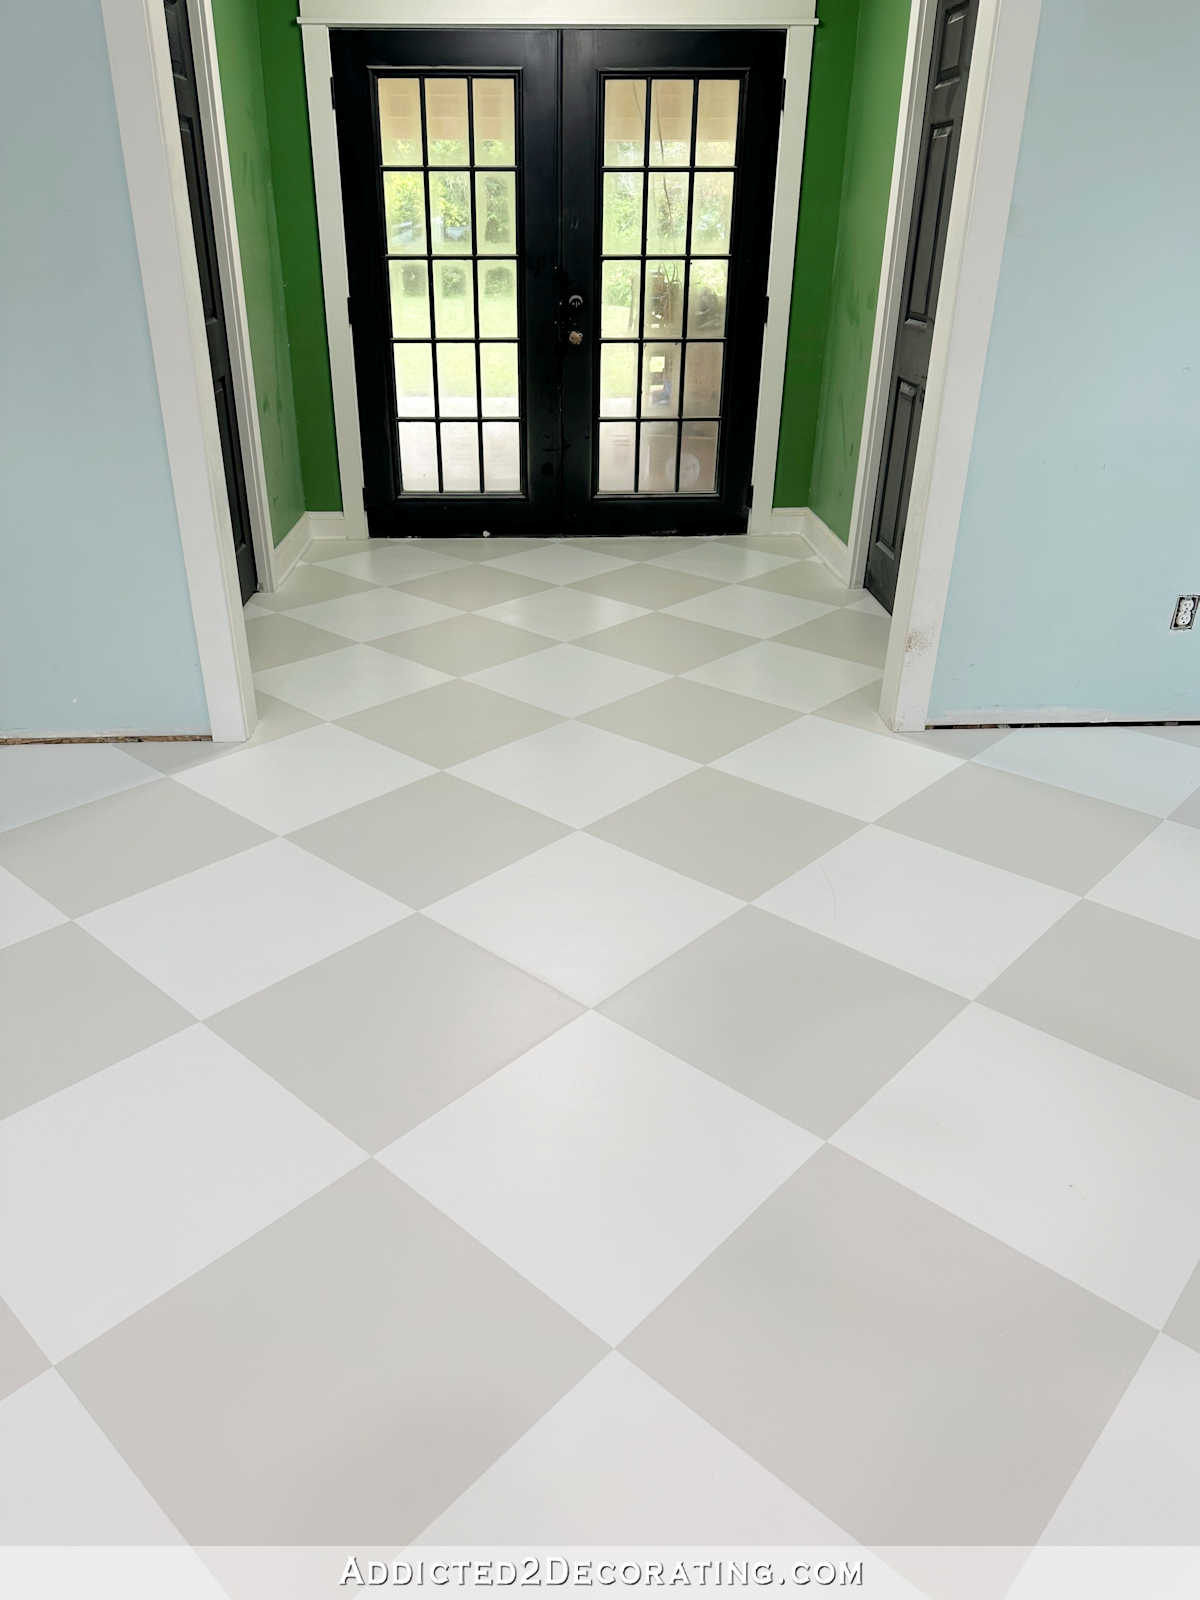 My Painted Checkerboard Studio Floor Is Finished!